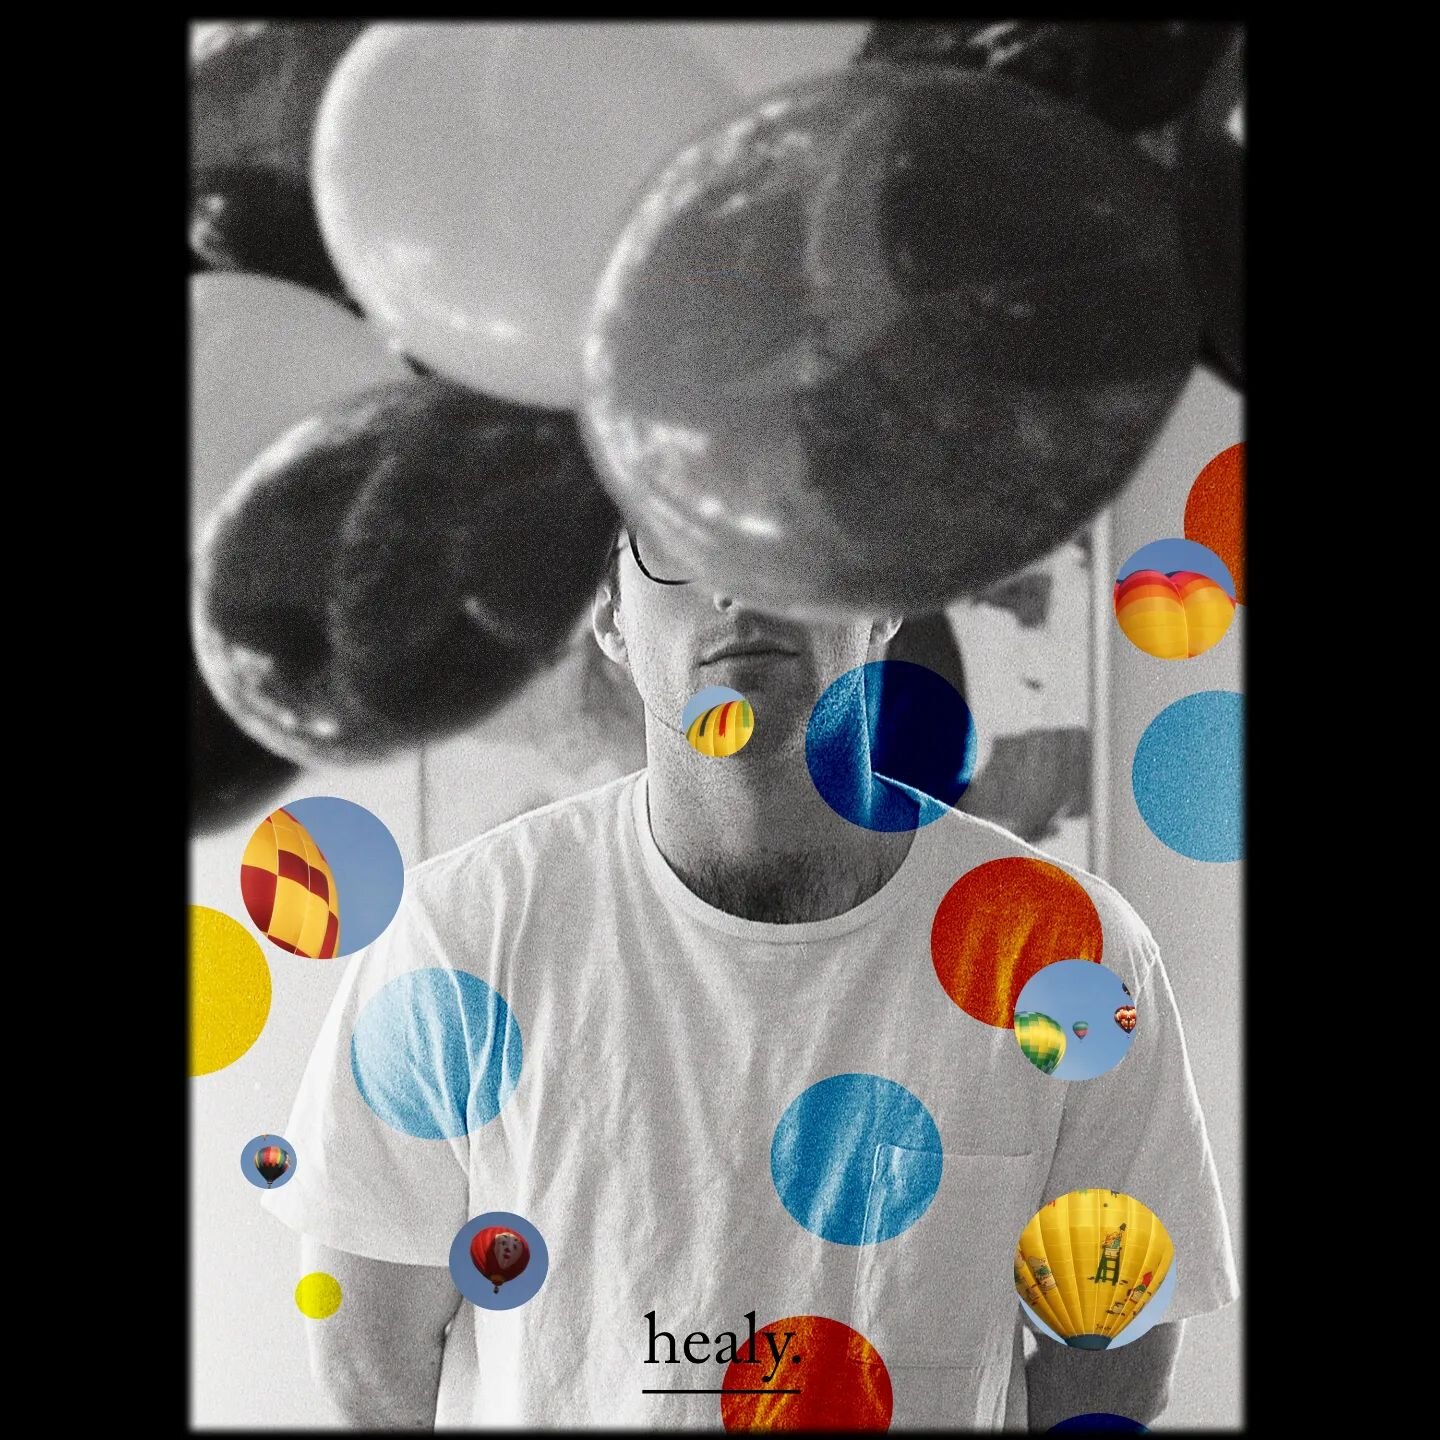 At this point I'm just having fun

I love @jah_phealy and his music so I had to get this one done

#art #artist #artistsoninstagram #posterdesign #digitalart #graphicdesign #healy #godisgood